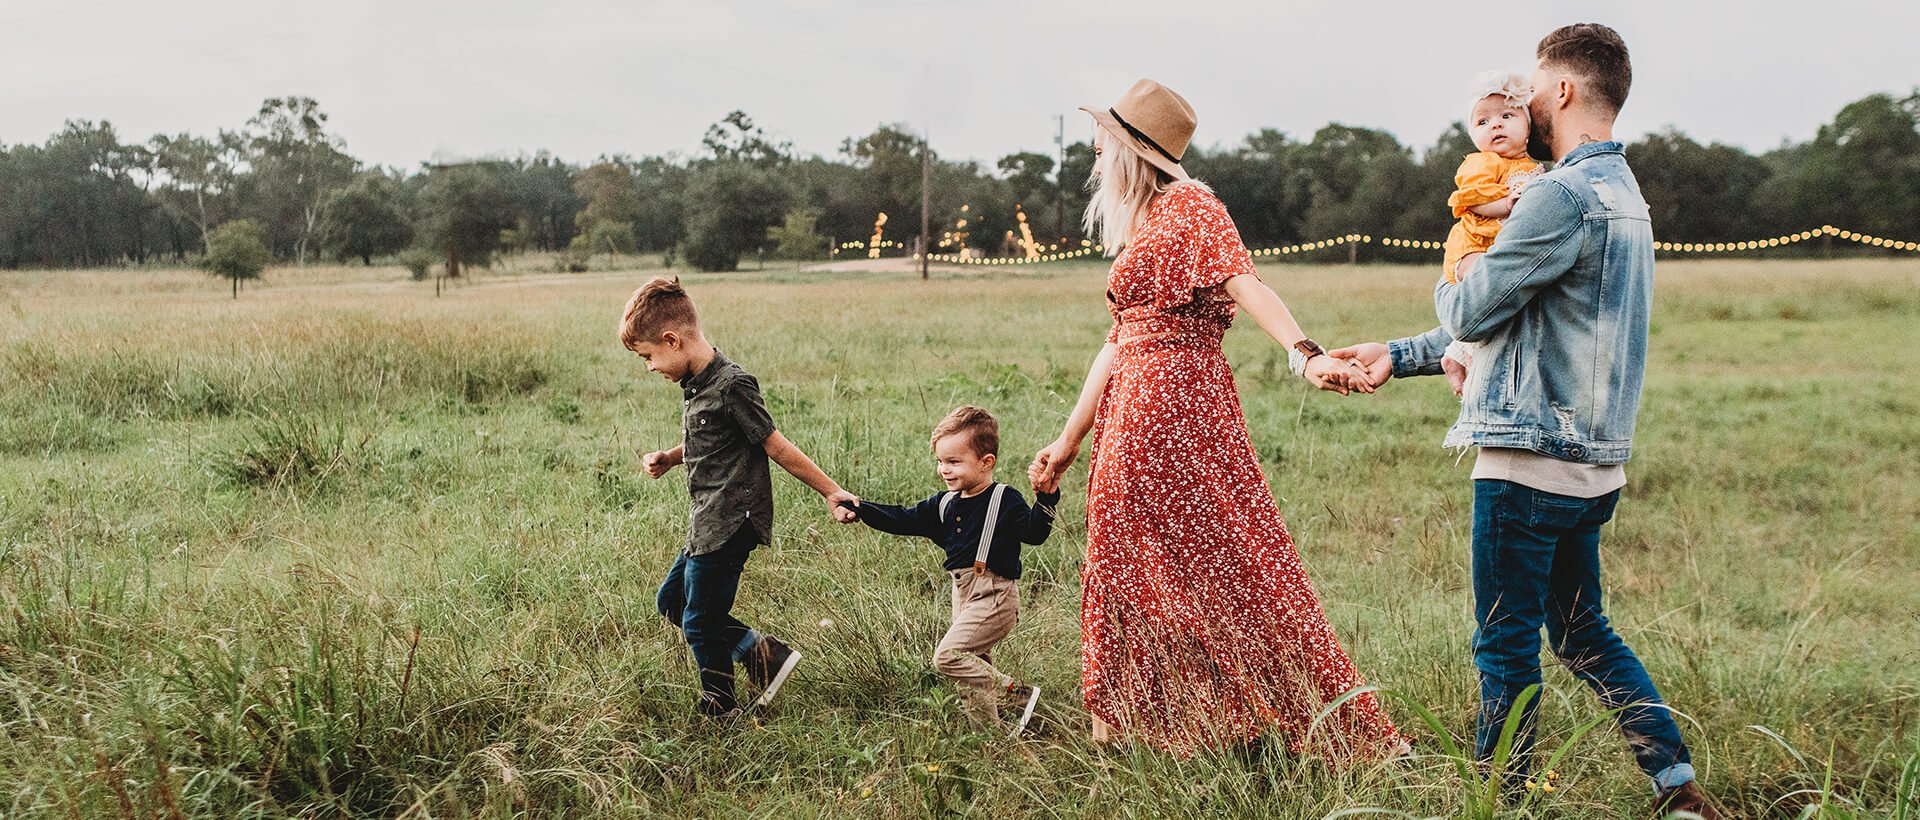 a family walking through a field holding hands.